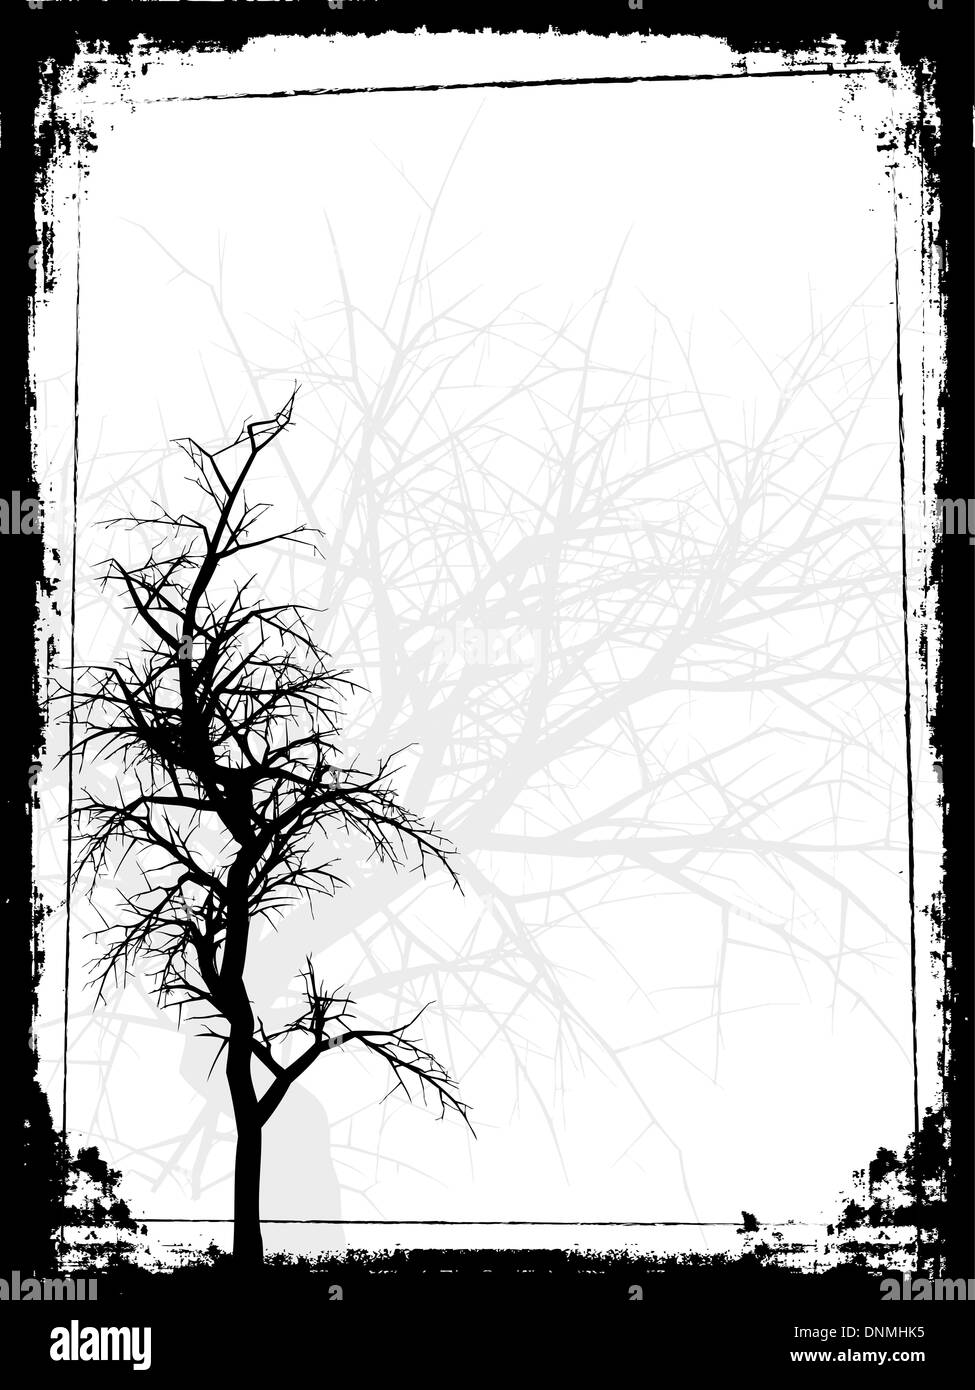 Silhouette of trees on grunge background Stock Vector